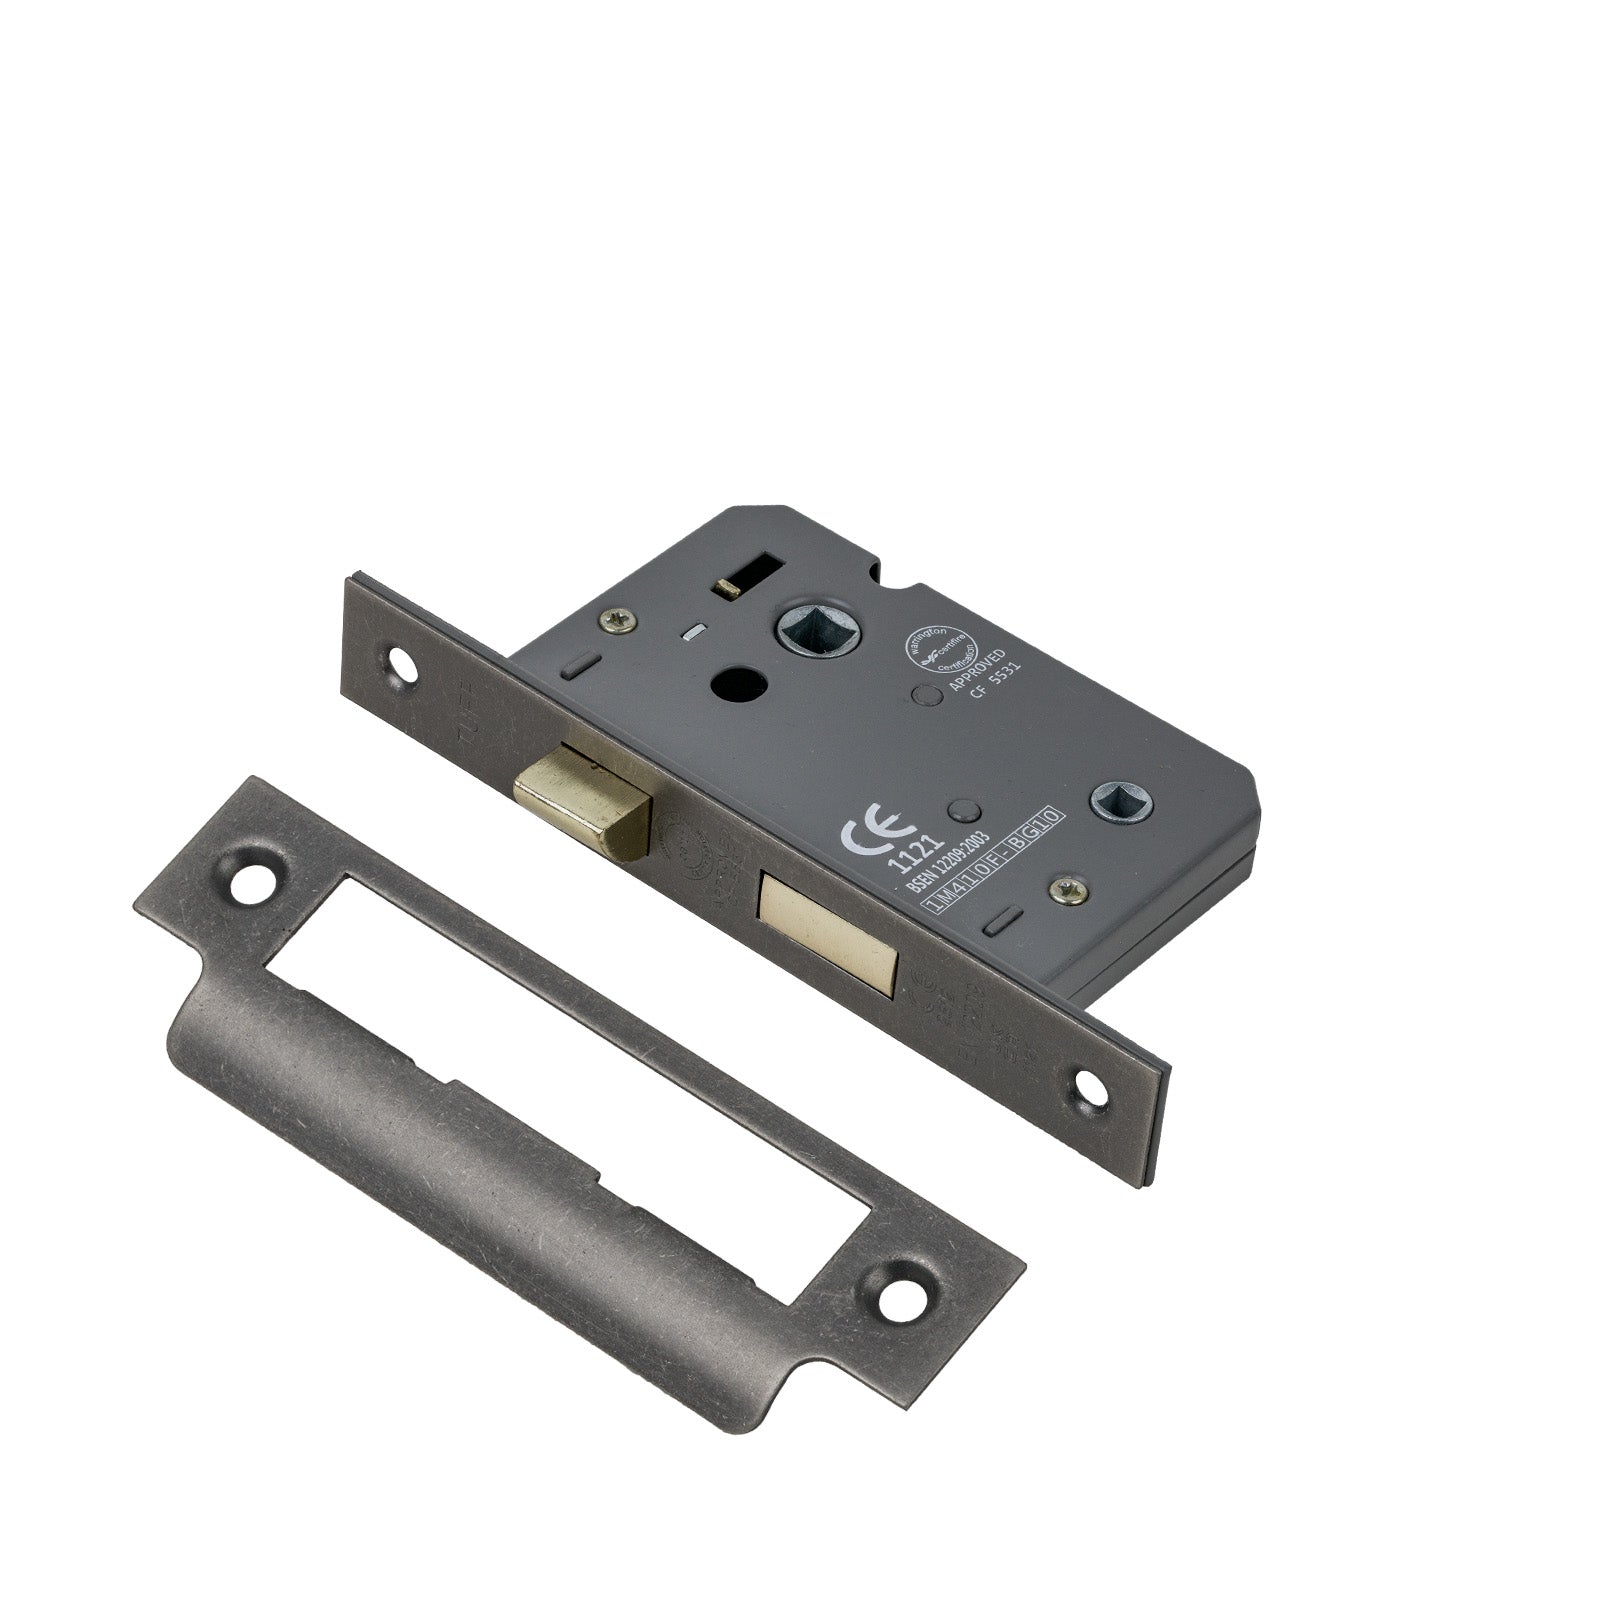 SHOW Bathroom Sash Lock - 2.5 Inch with Distressed Silver finished forend and striker plate